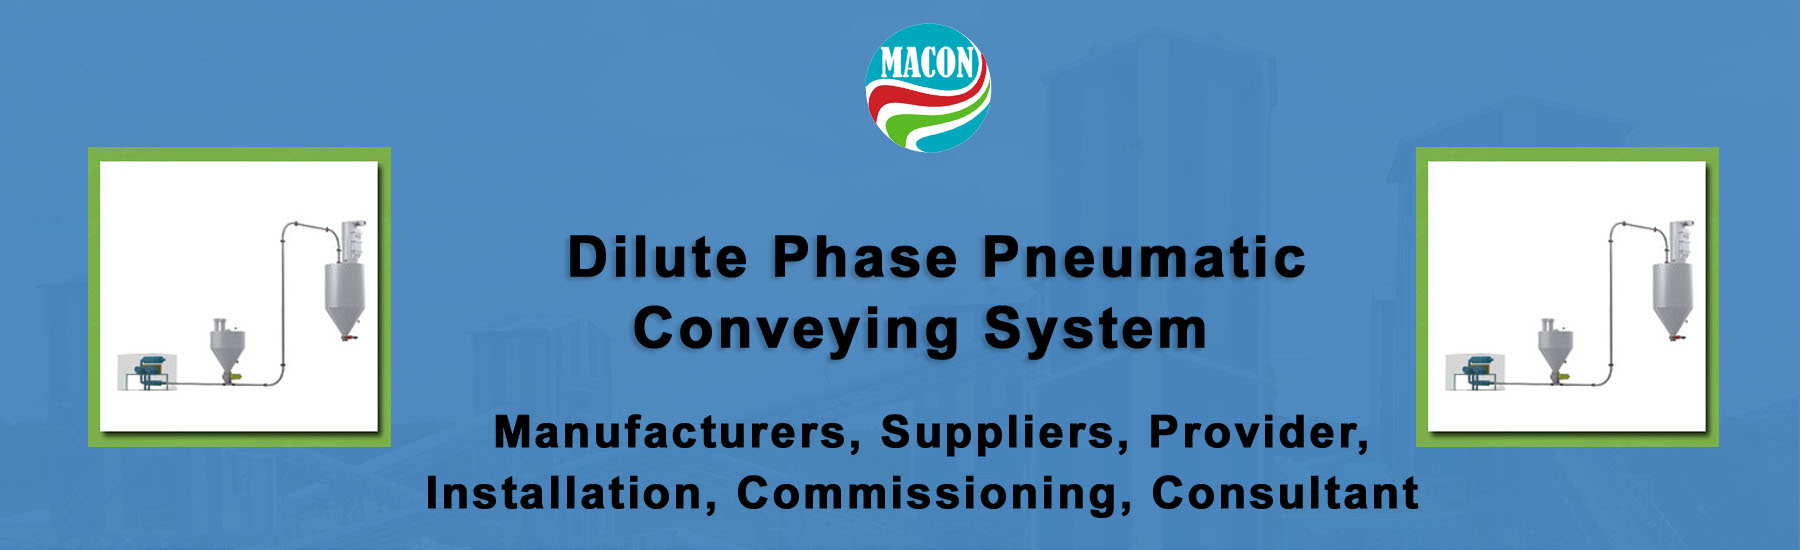 Dilute Phase Pneumatic Conveying System